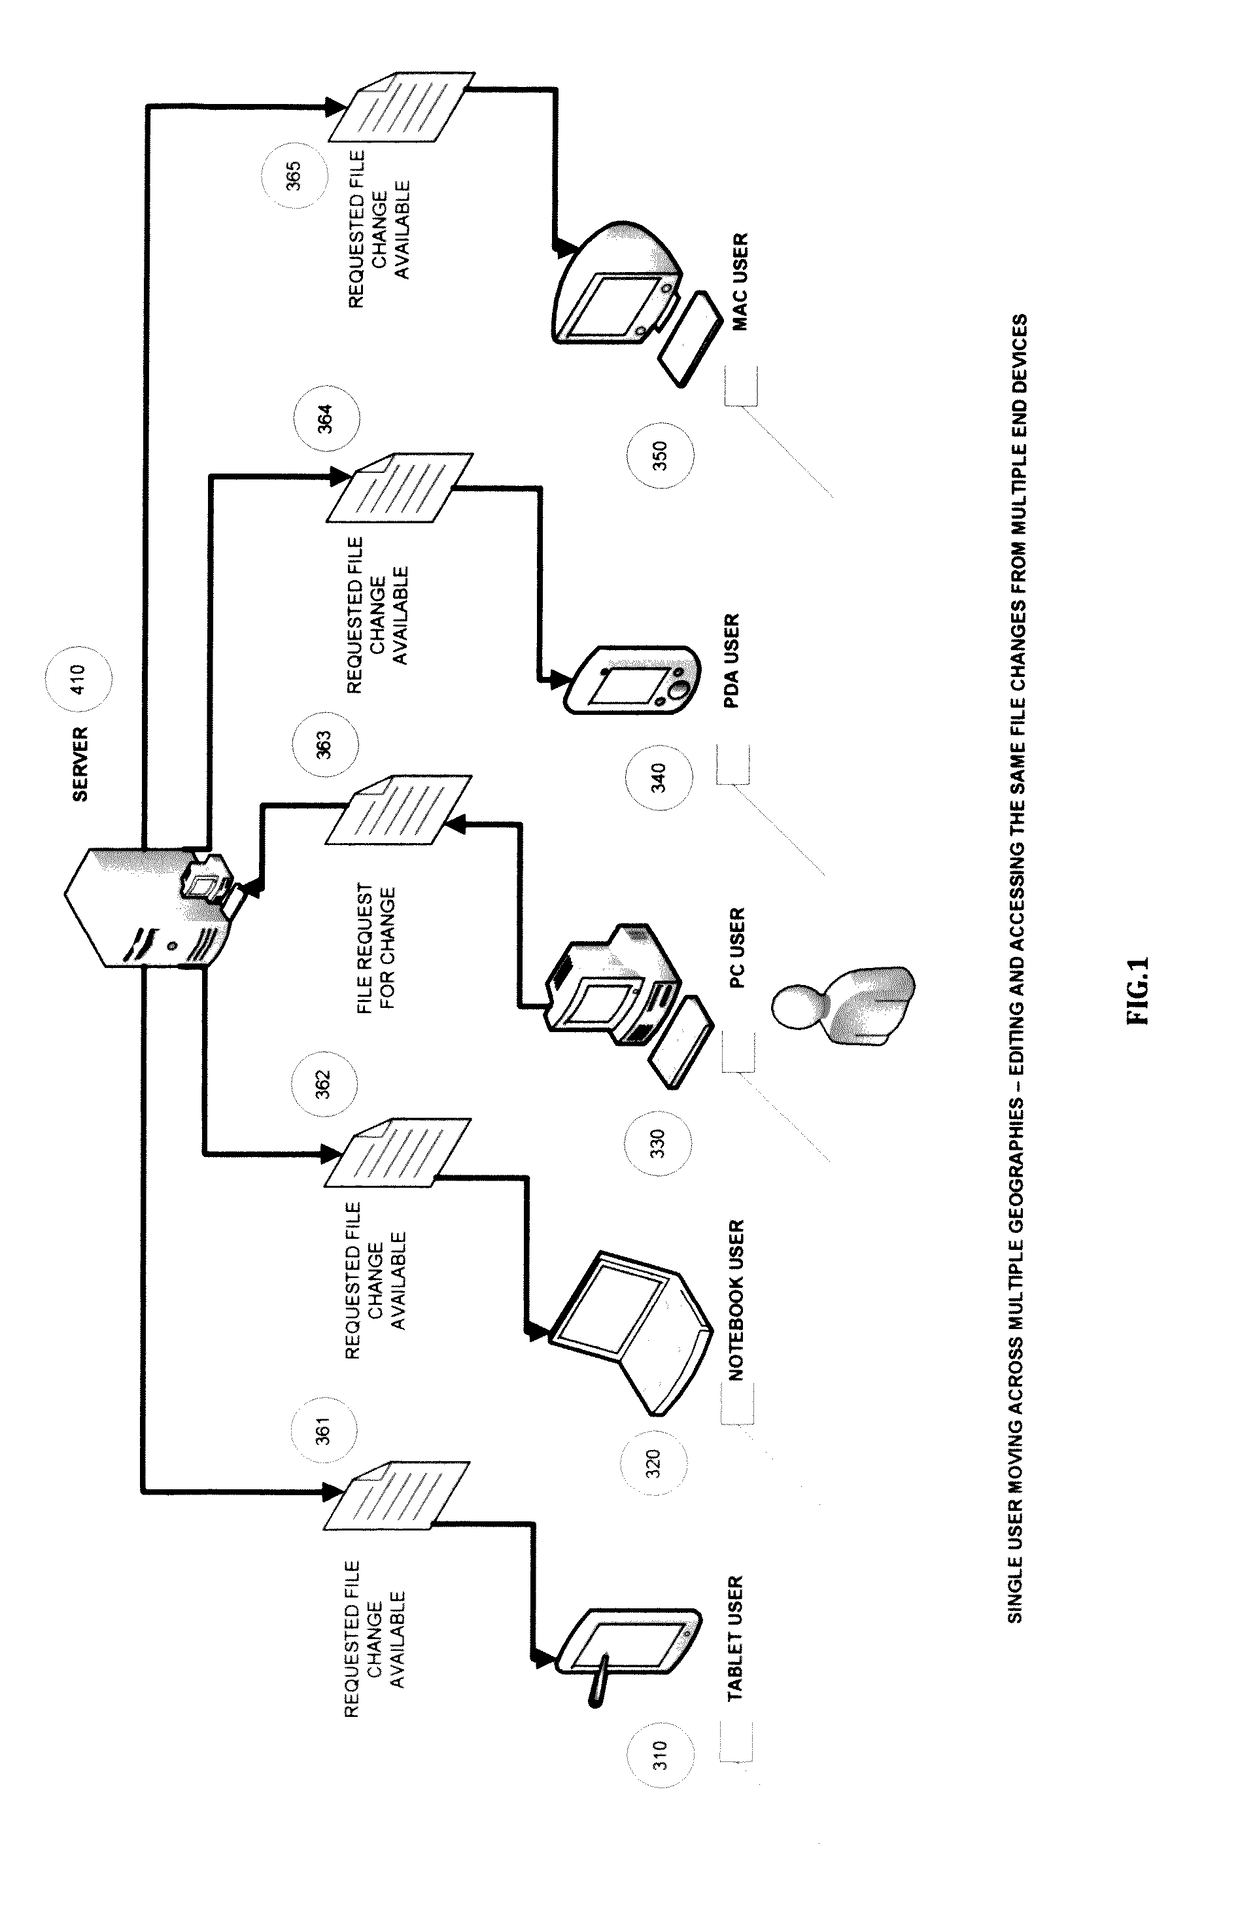 System and methods for detecting precise file system events from a large number and assortment of automatically-generated file system events during user operations